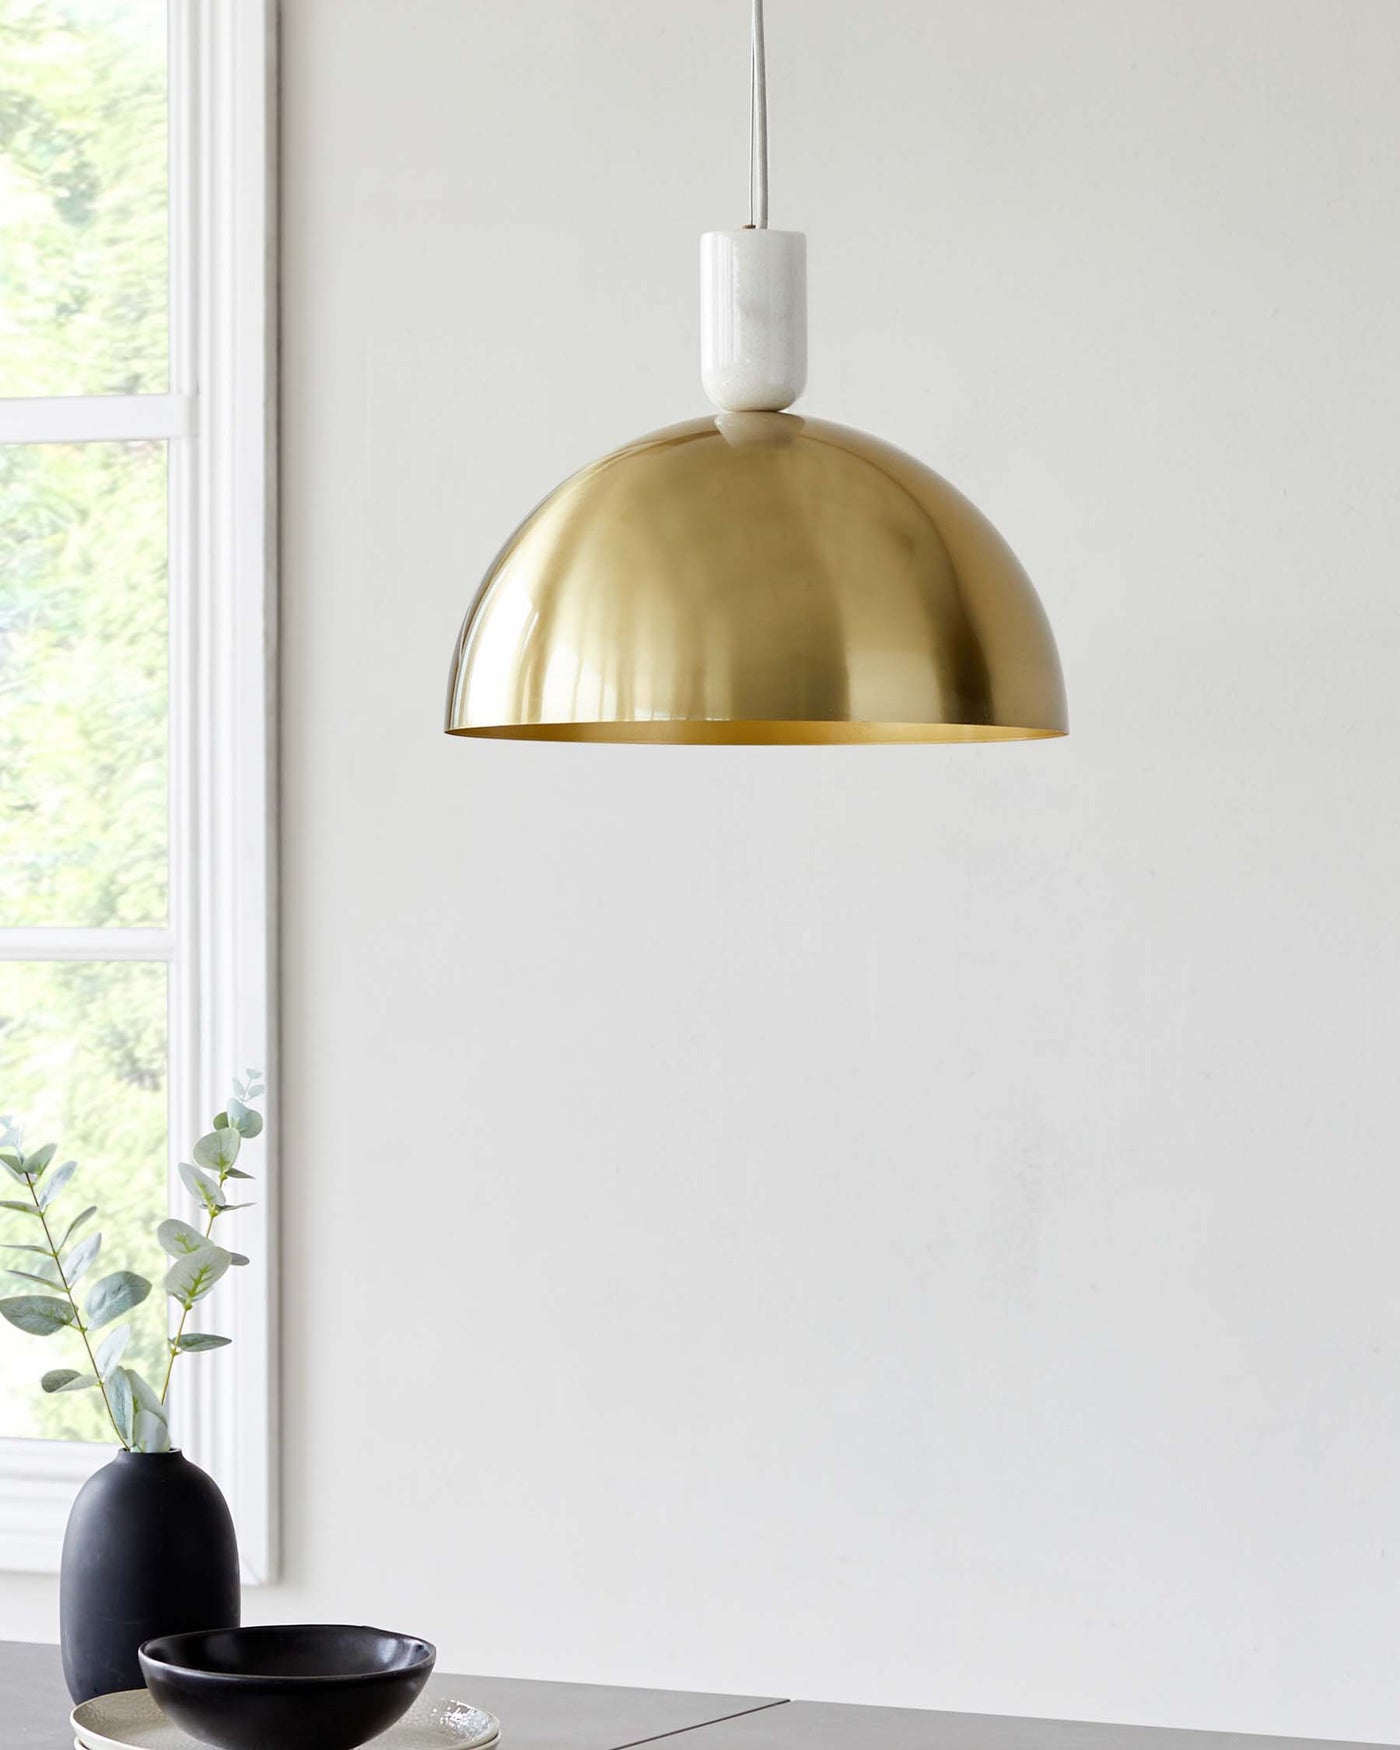 Elegant brass dome pendant light hanging above a minimalist setting including a matte black vase with greenery and a black bowl on a sleek, modern table with a neutral-tone surface.